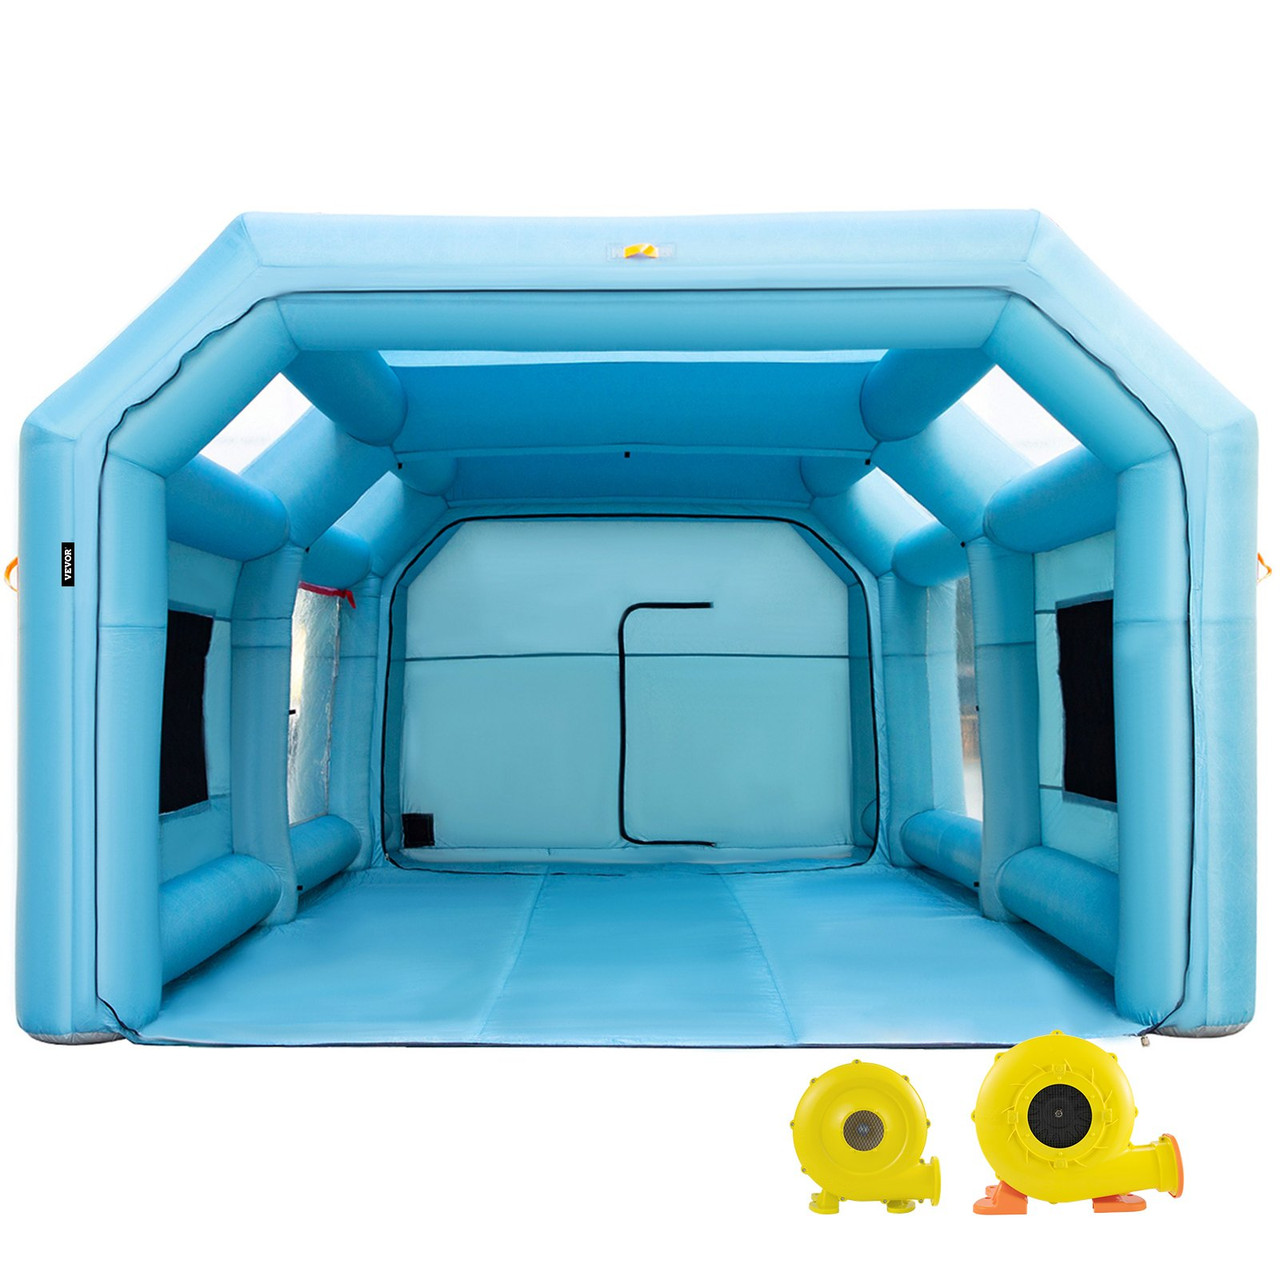 Portable Inflatable Paint Booth, 23x13x8ft Inflatable Spray Booth, Car Paint Tent w/Air Filter System & 2 Blowers, Upgraded Blow Up Spray Booth Tent, Auto Paint Workstation, Motorcycle Garage